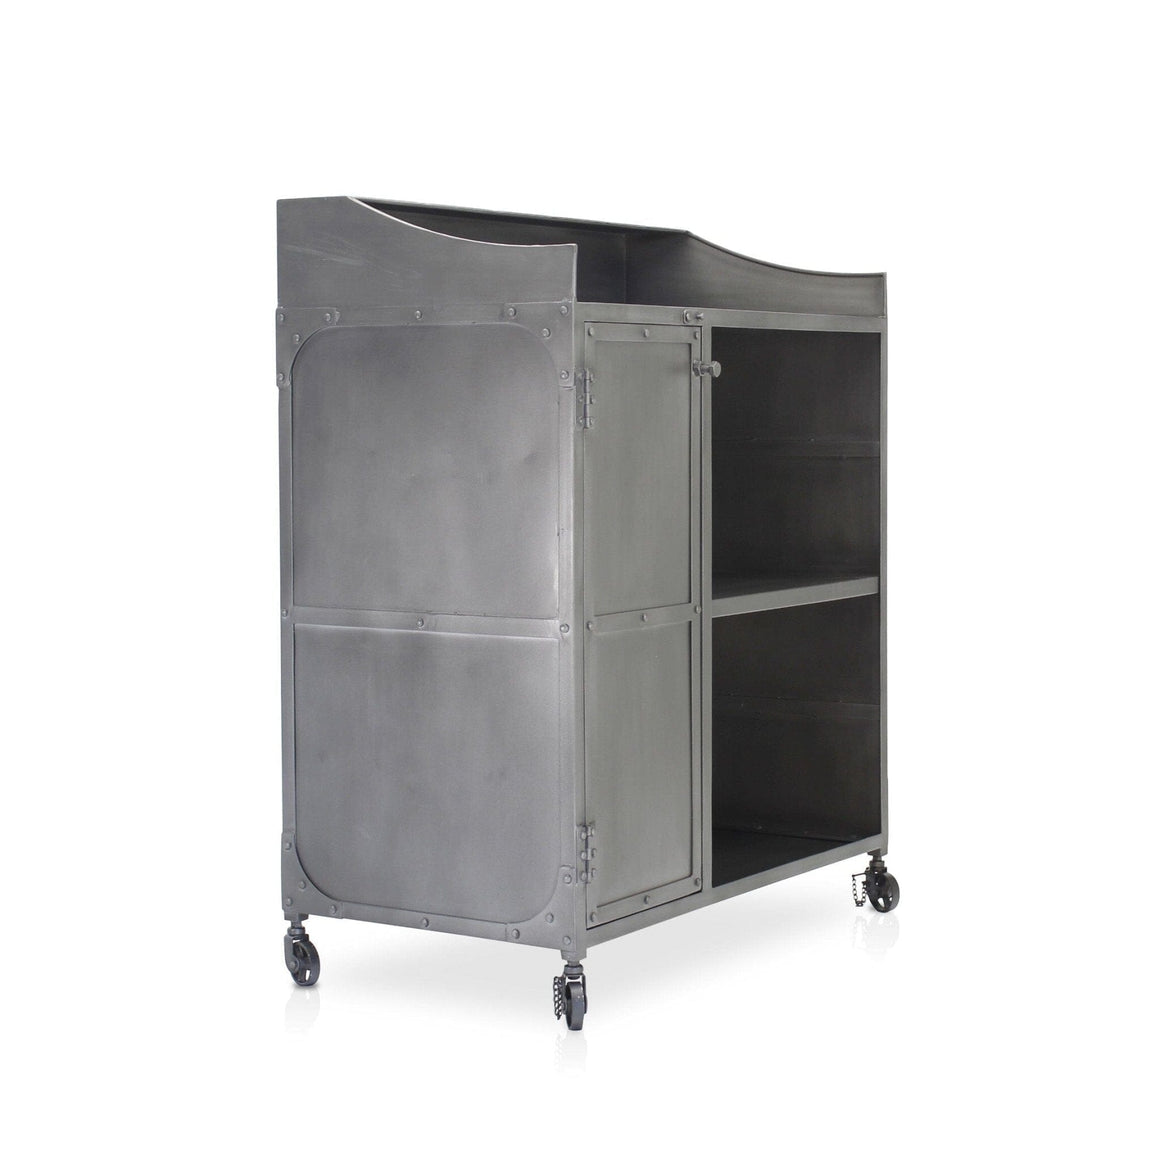 Industrial Reception Desk Hostess Station 36 in - Casters - Iron - Steel - Rustic Deco Incorporated